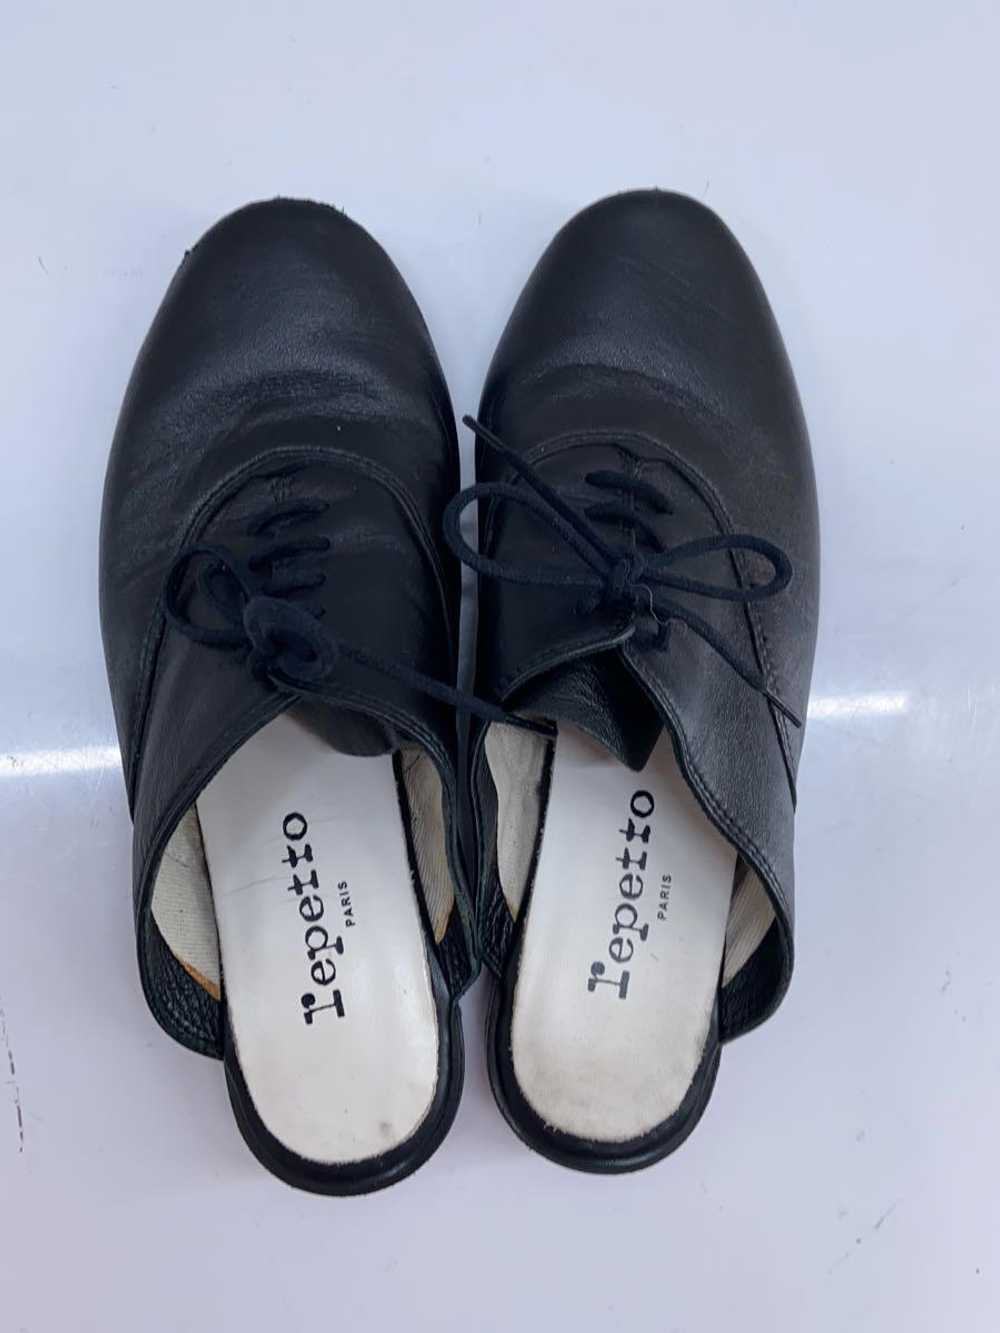 Repetto Mules/Shoes/35/Blk/Leather Shoes BbQ47 - image 3